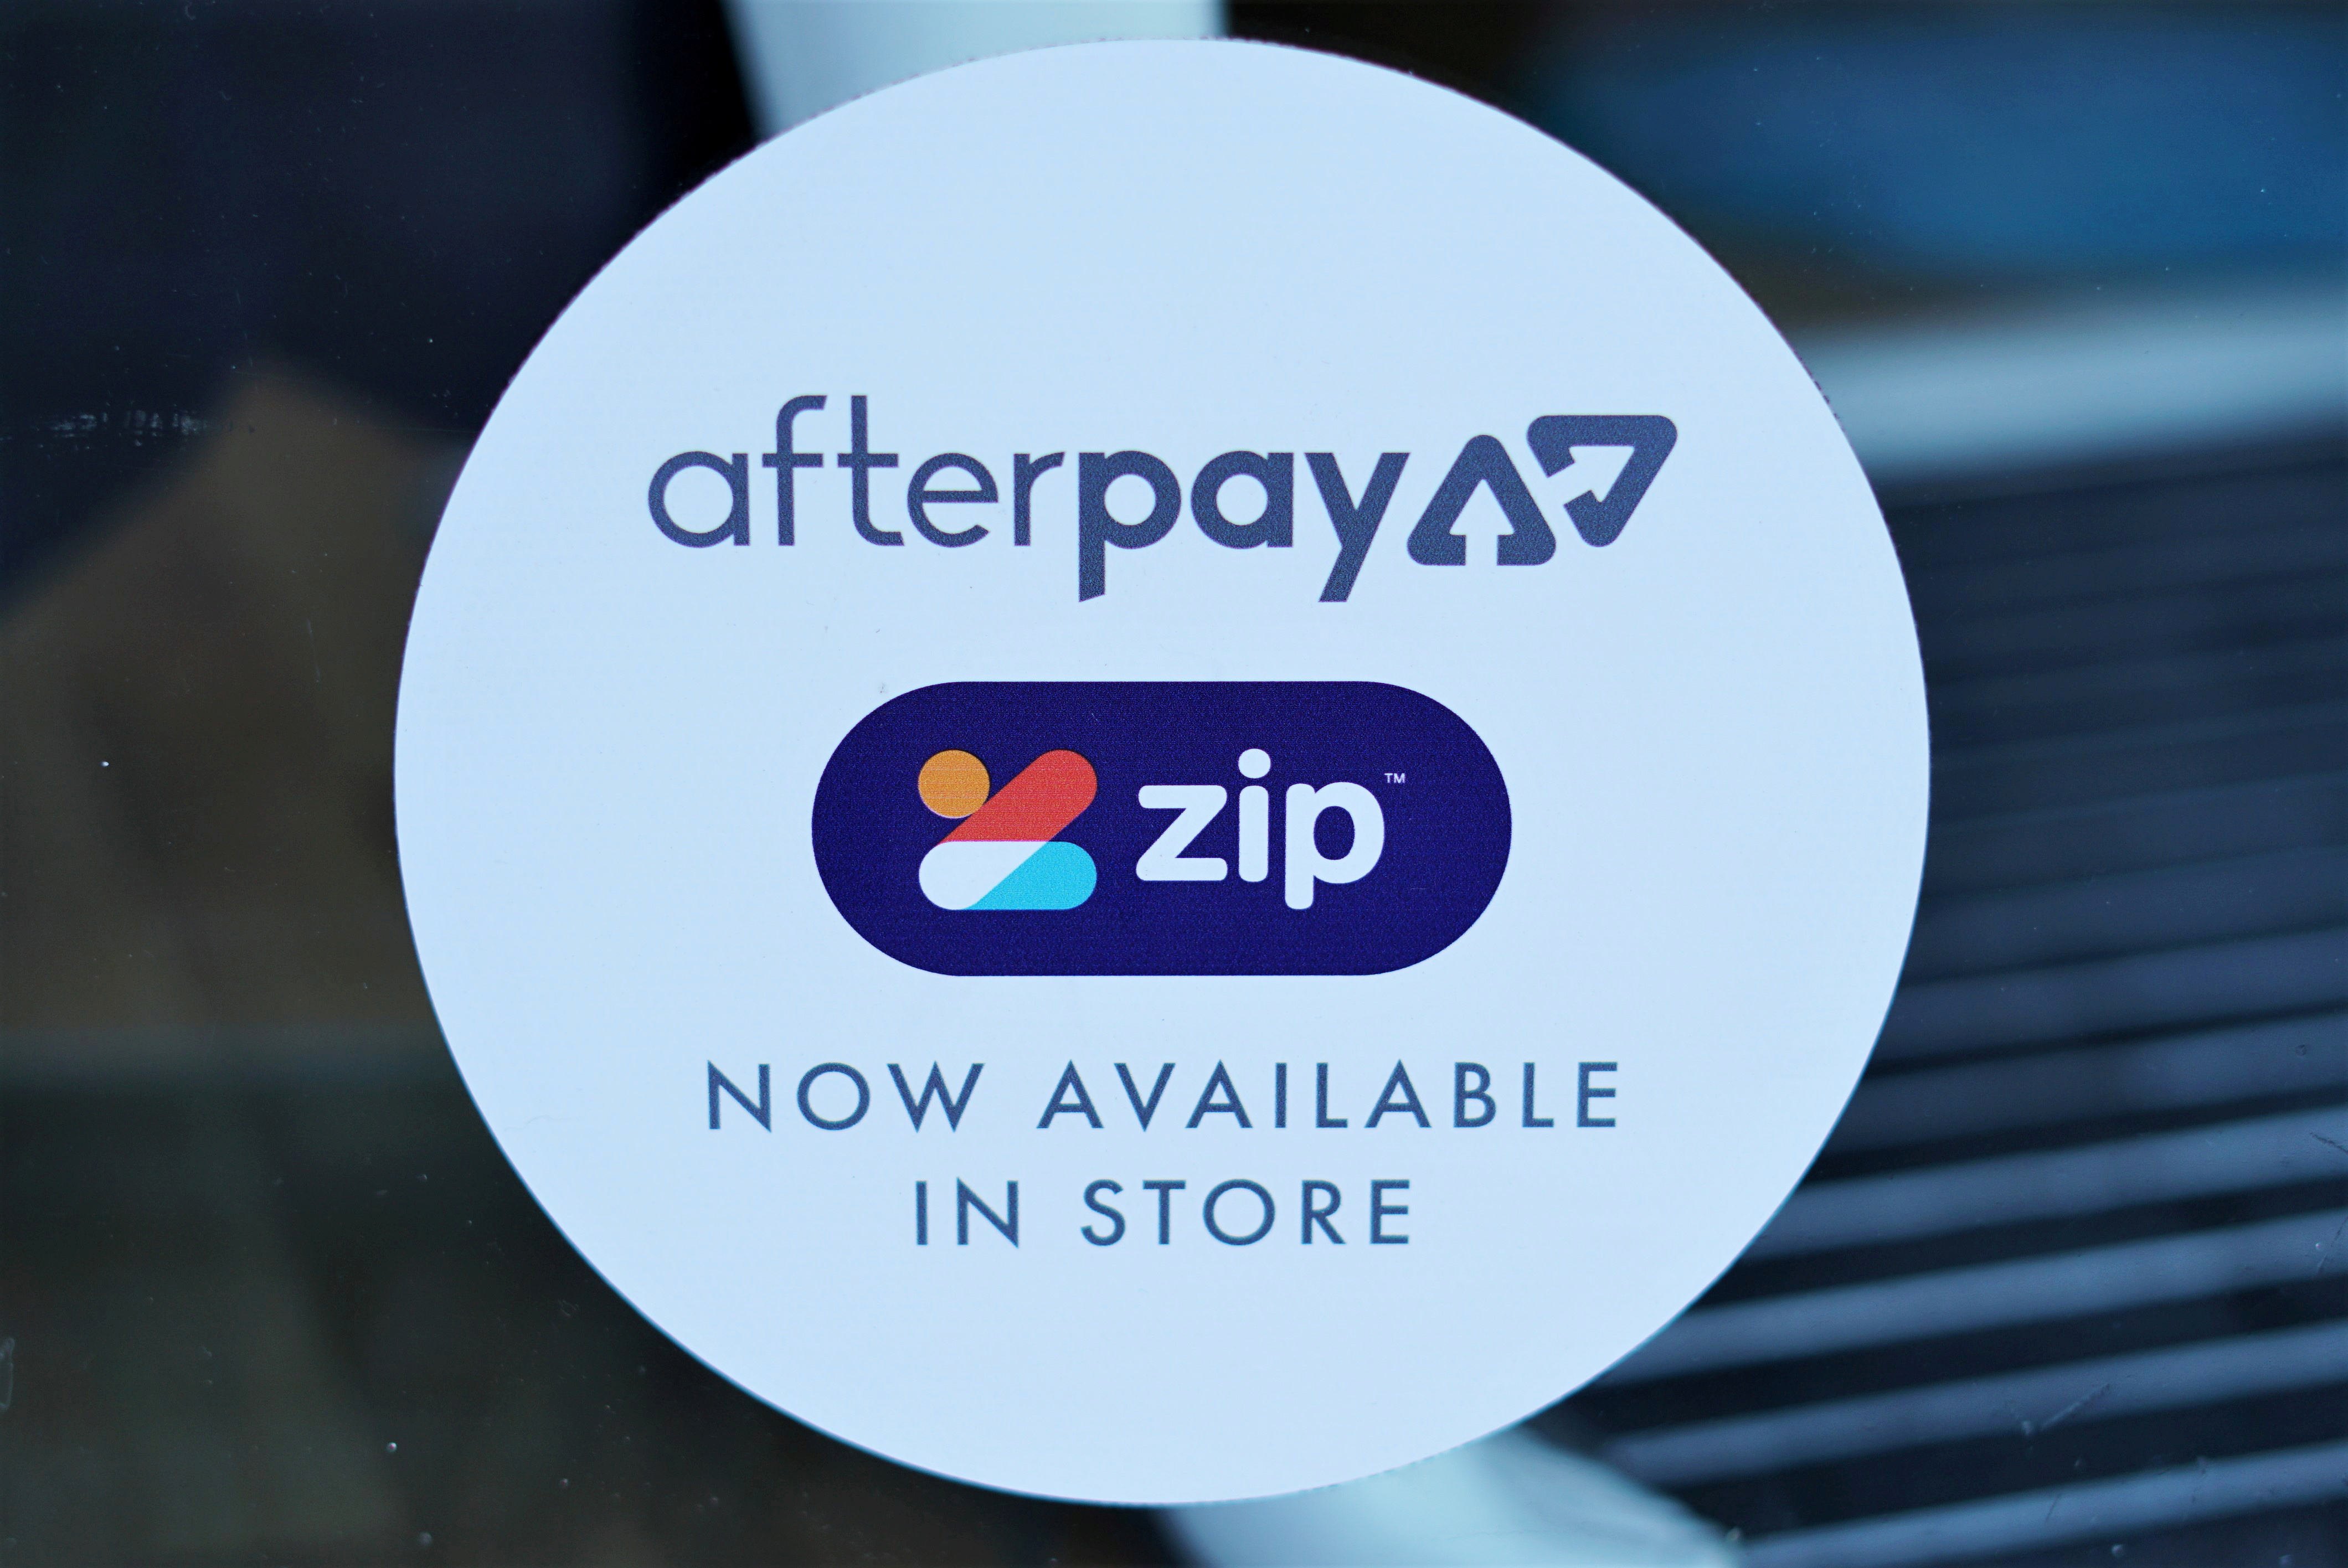 What is Afterpay, and what are its risks?